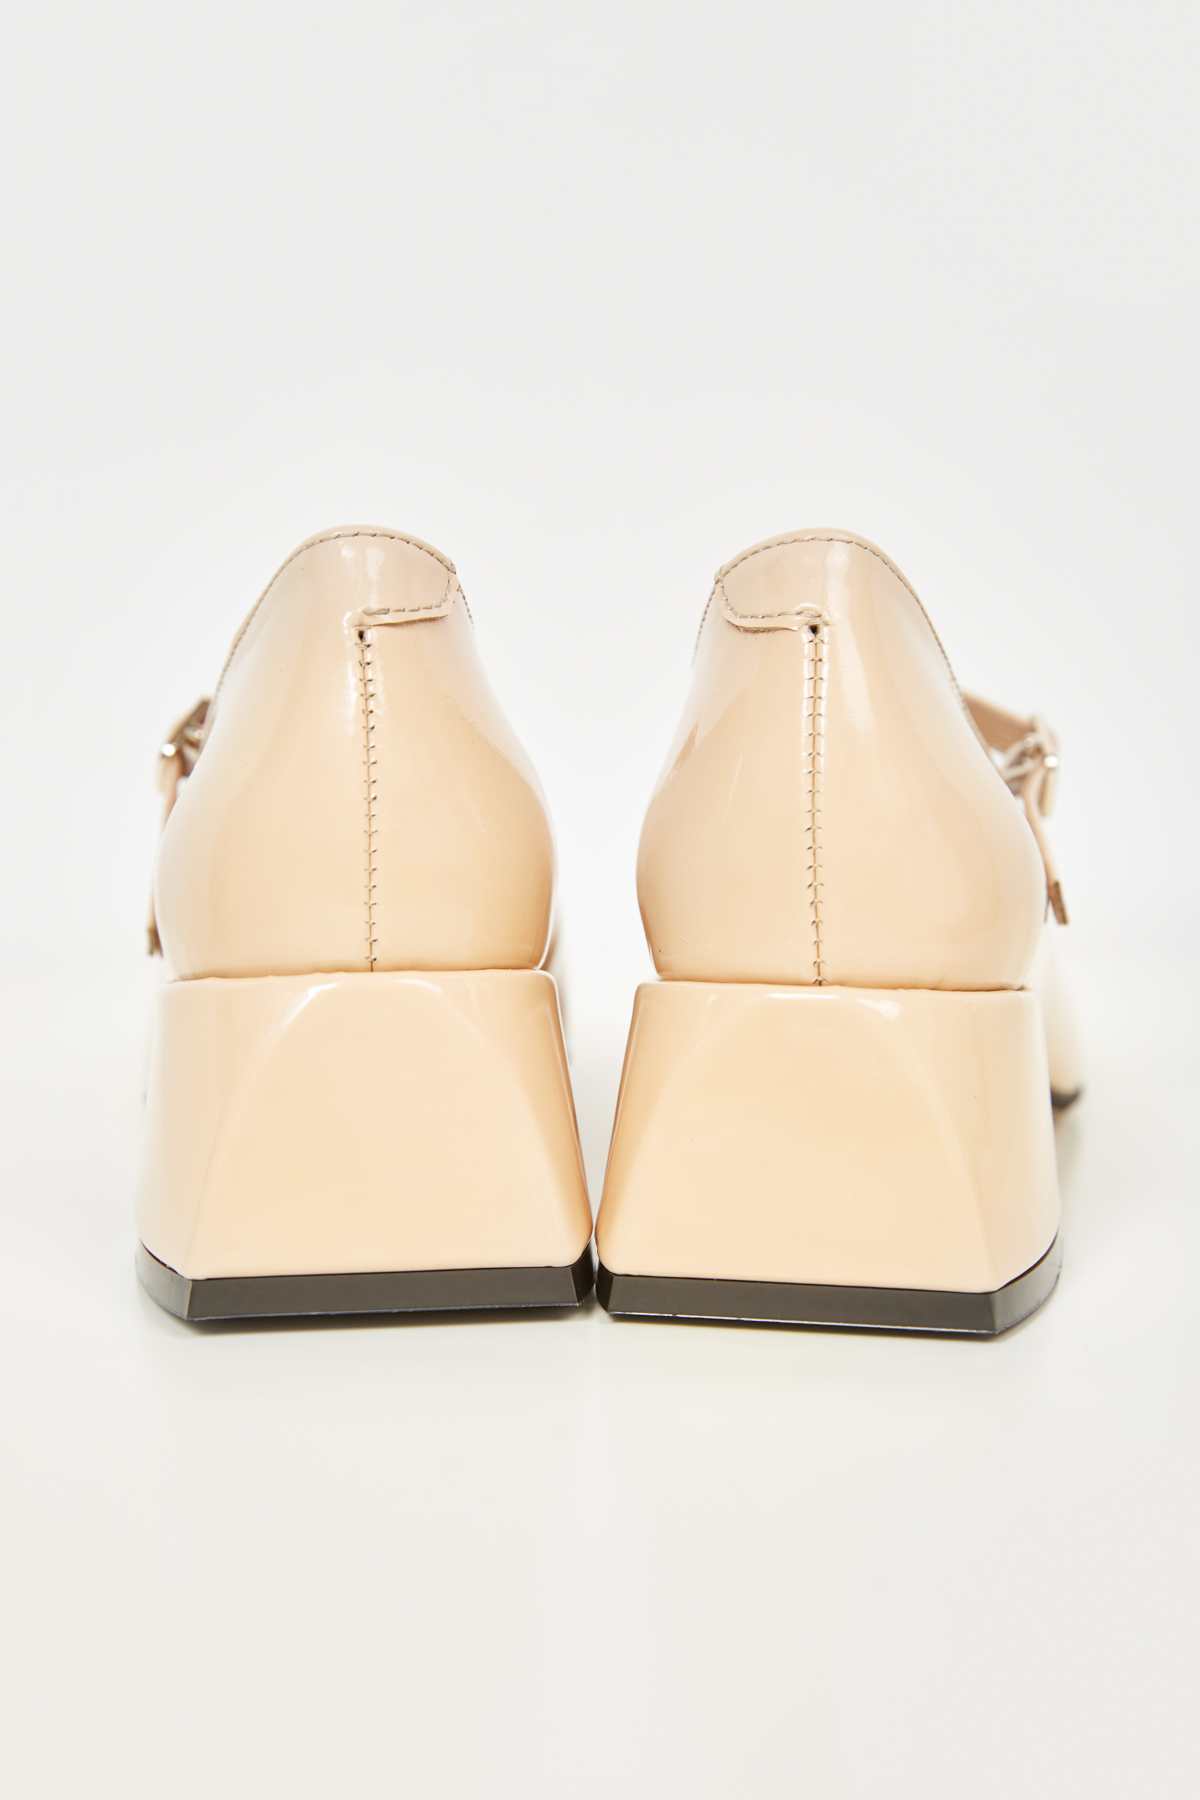 Beige patent leather shoes, photo 3